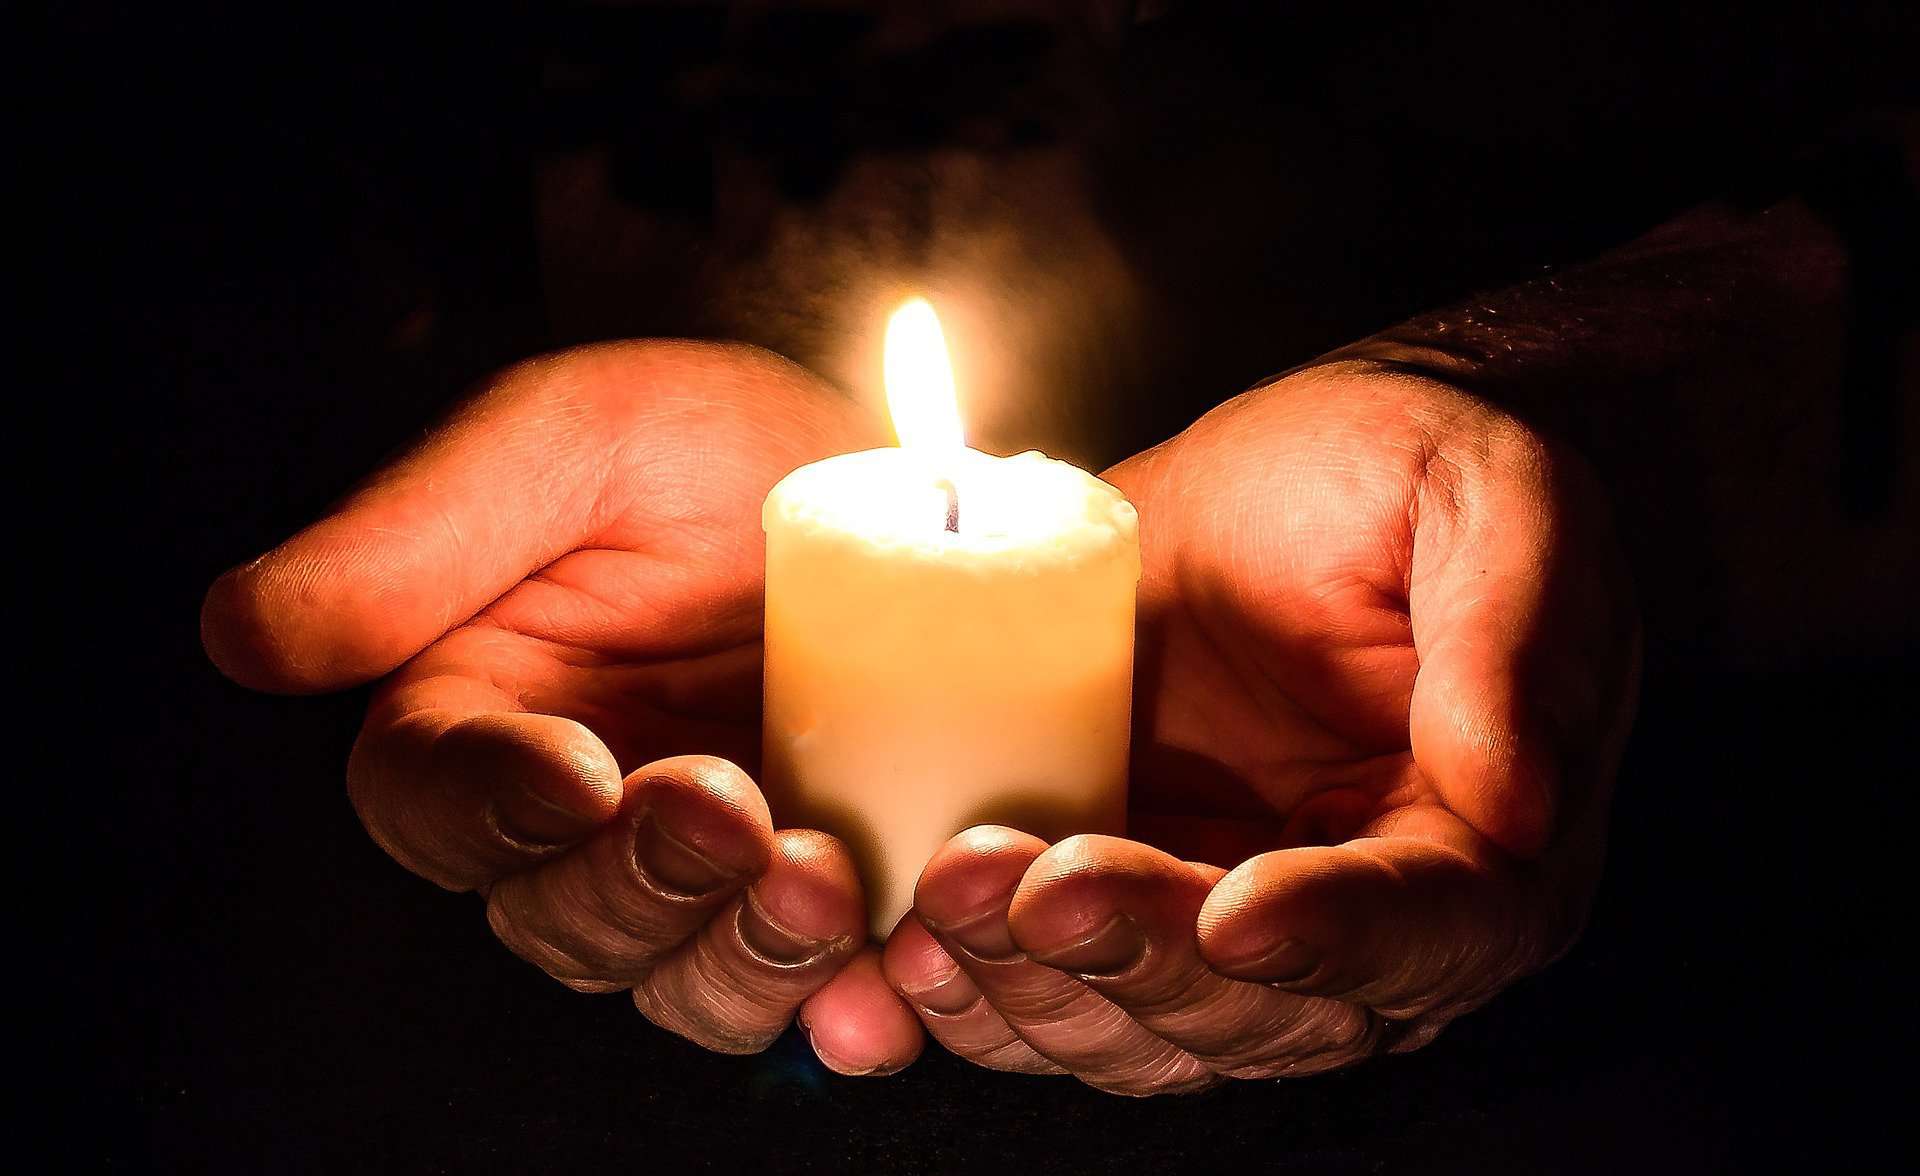 Hands shown close up hold a small, lit, votive candle.